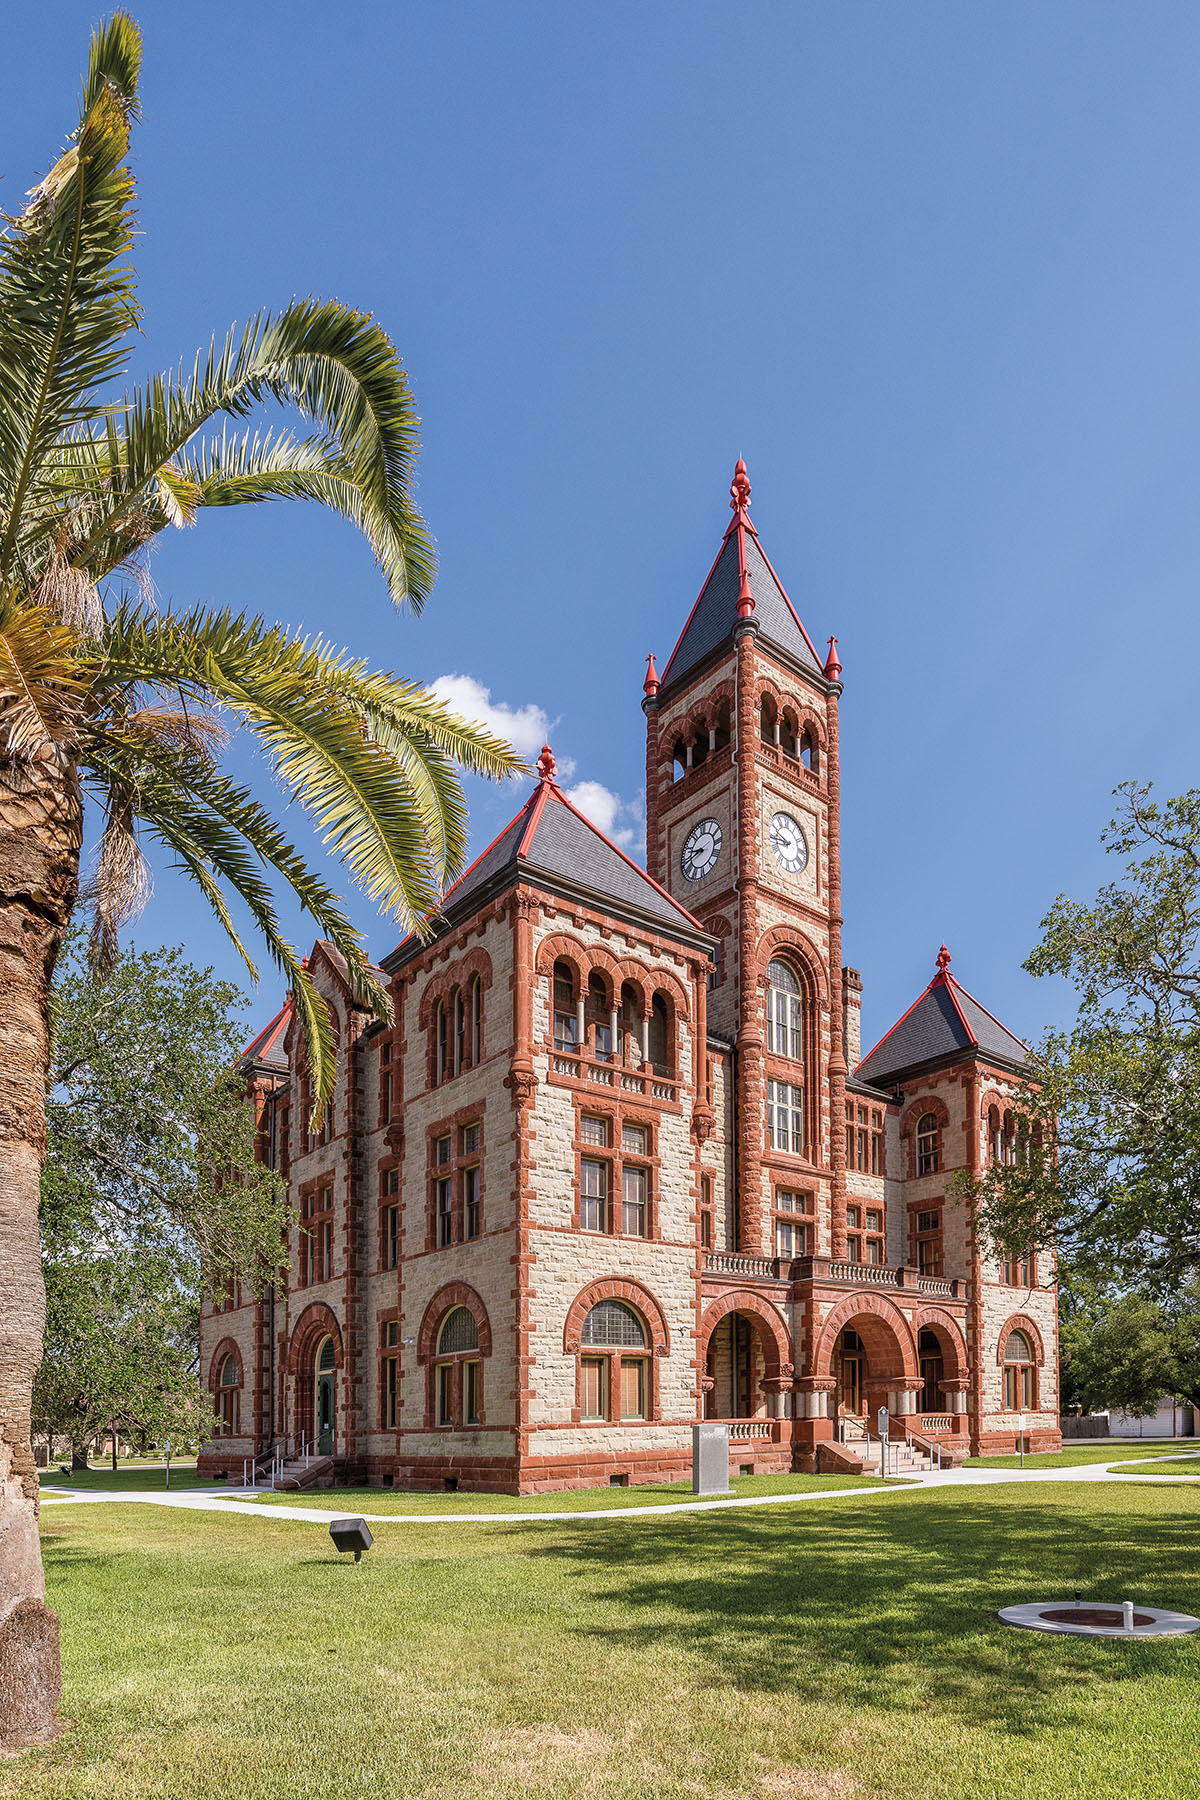 The exterior of an ornate courthouse with red brick stone accents under blue sky